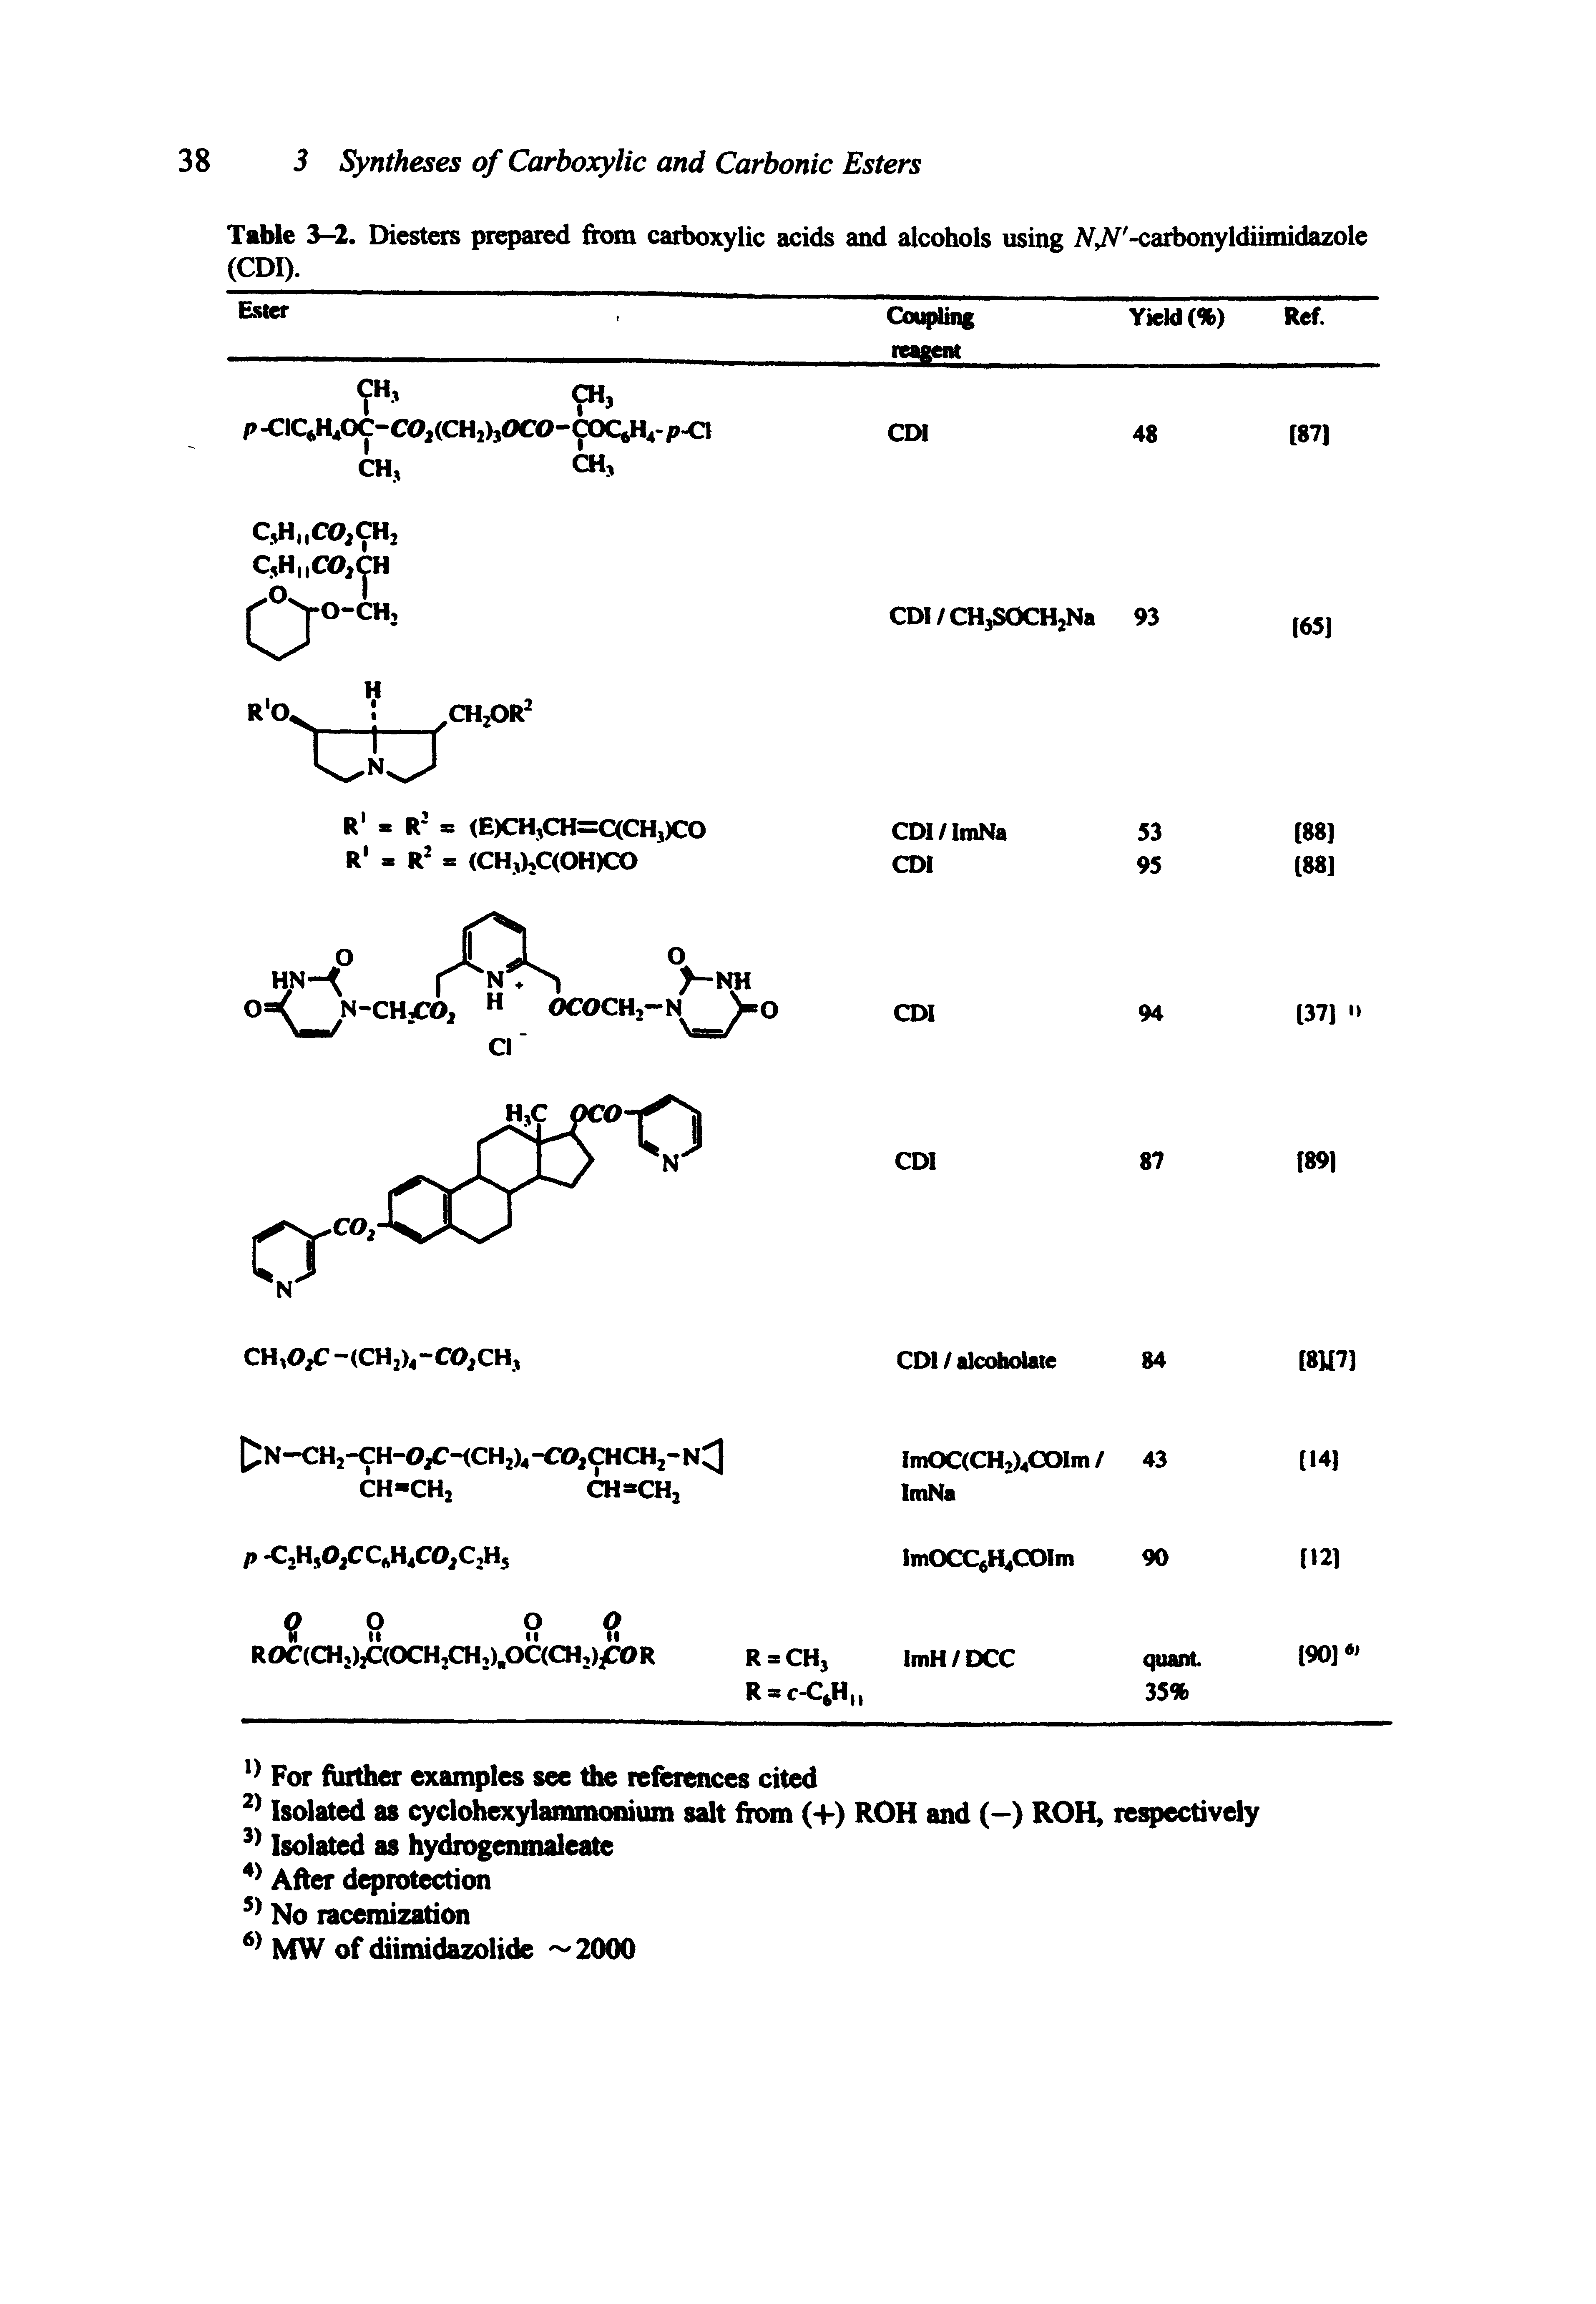 Table 3-2. Diesters prepared from carboxylic acids and alcohols using A -carbonyldiimidazole (CDI).